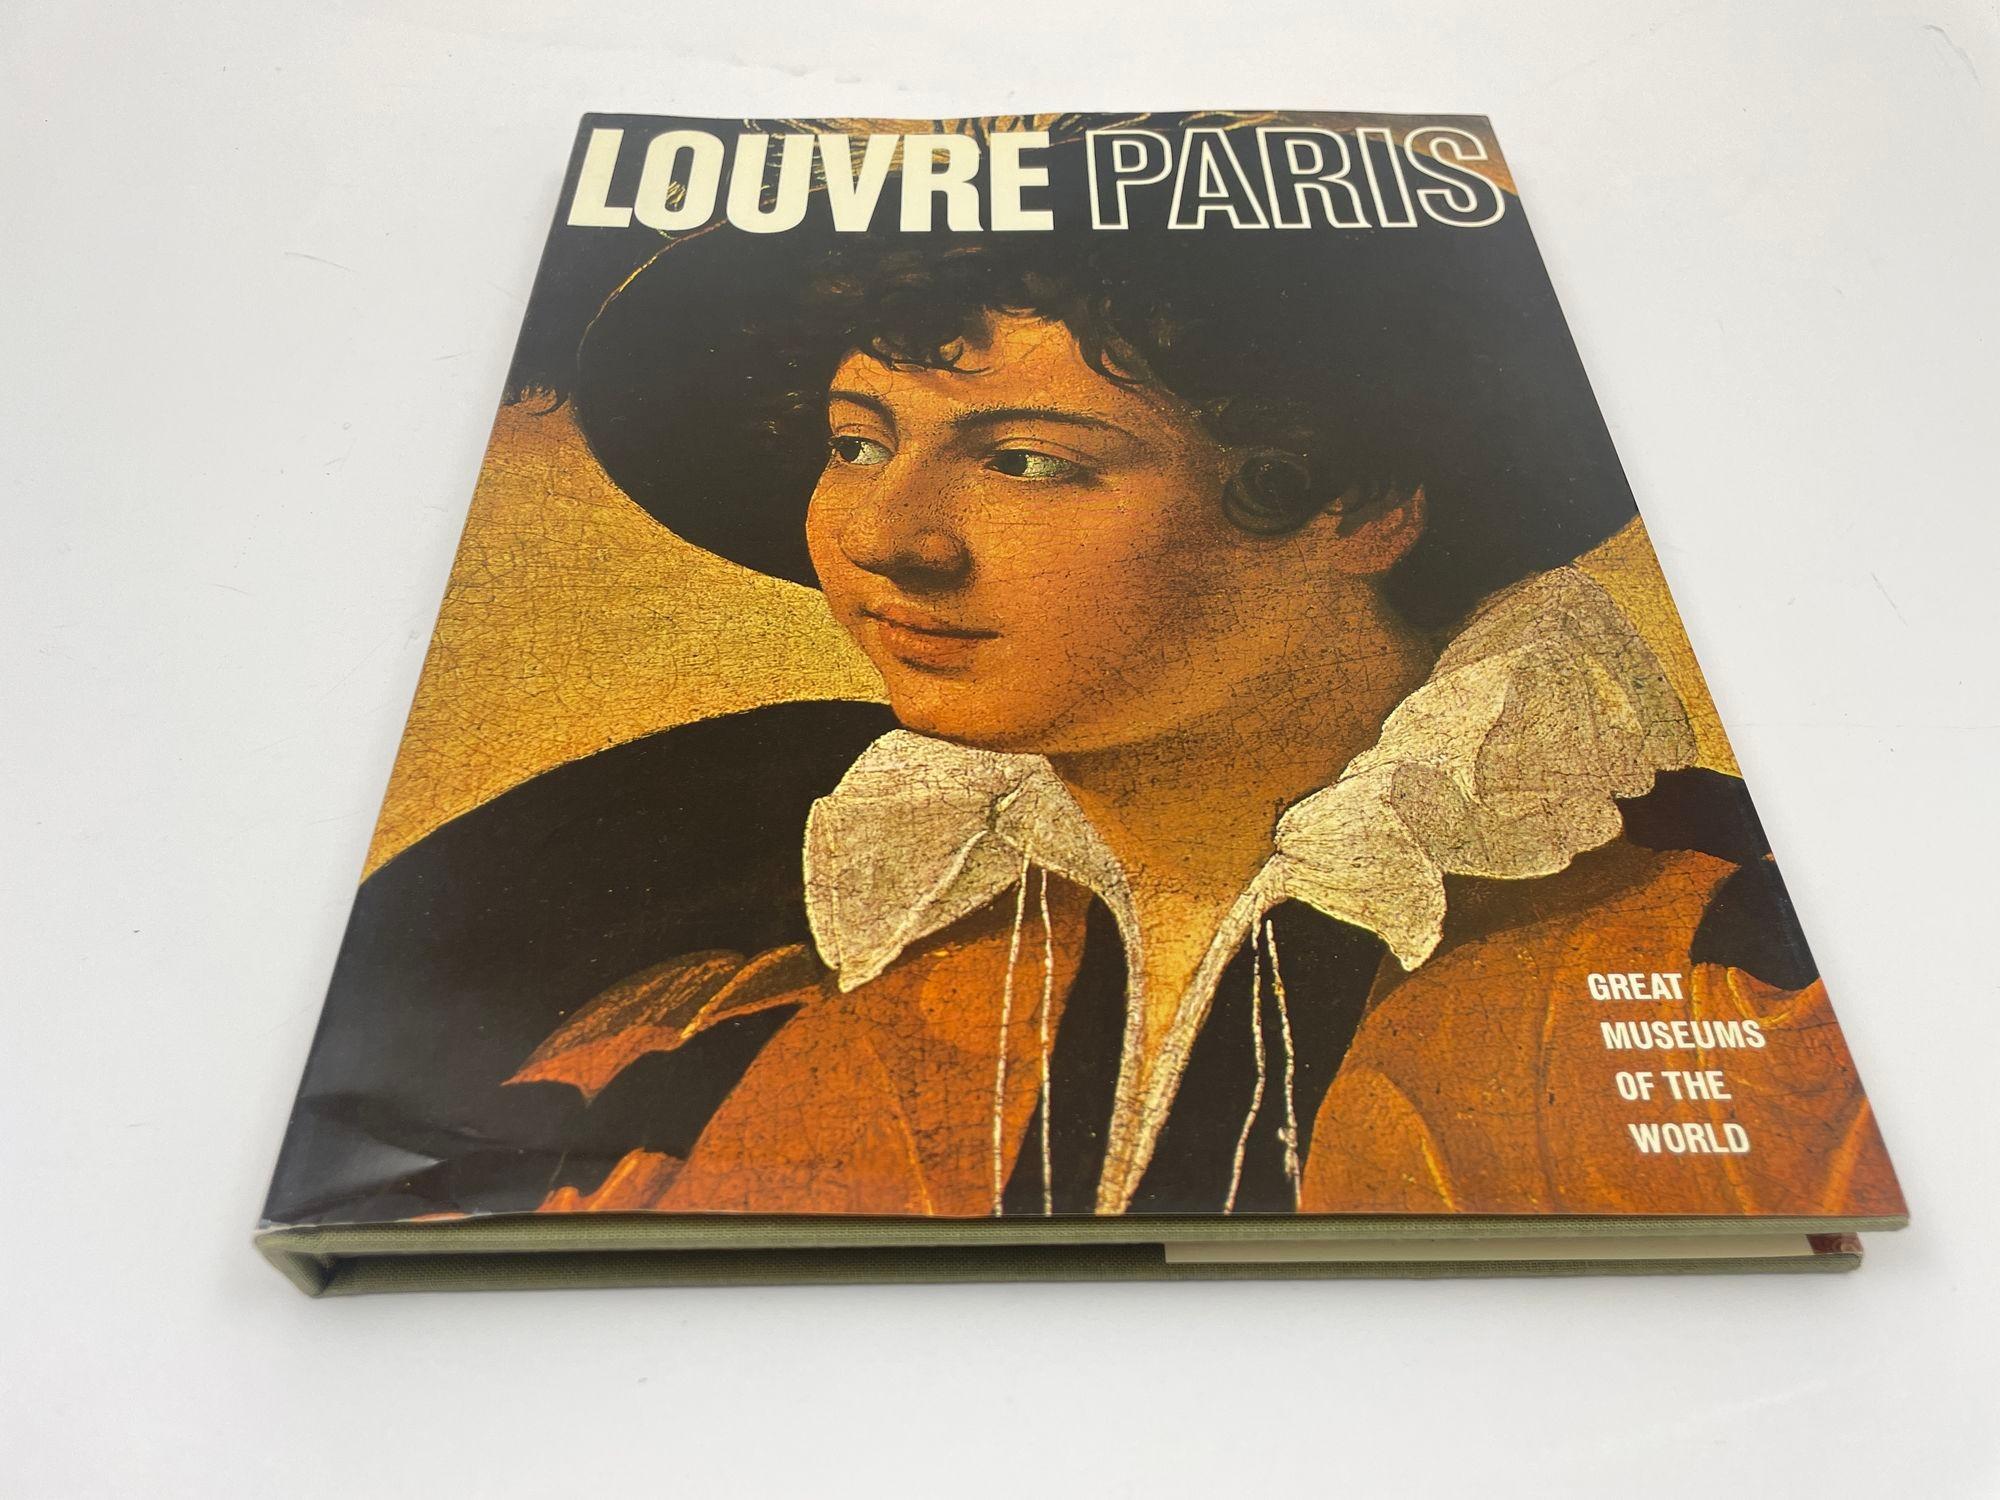 Louvre Paris Great Museums Of The World Hardcover by editor Ragghianti, Carlo Ludovico.Vintage 1967 'Louvre Paris: Great Museums of the World' Hardcover Book! This book was published by Newsweek Inc. and Arnoldo Mondadori Editore in 1967. This book